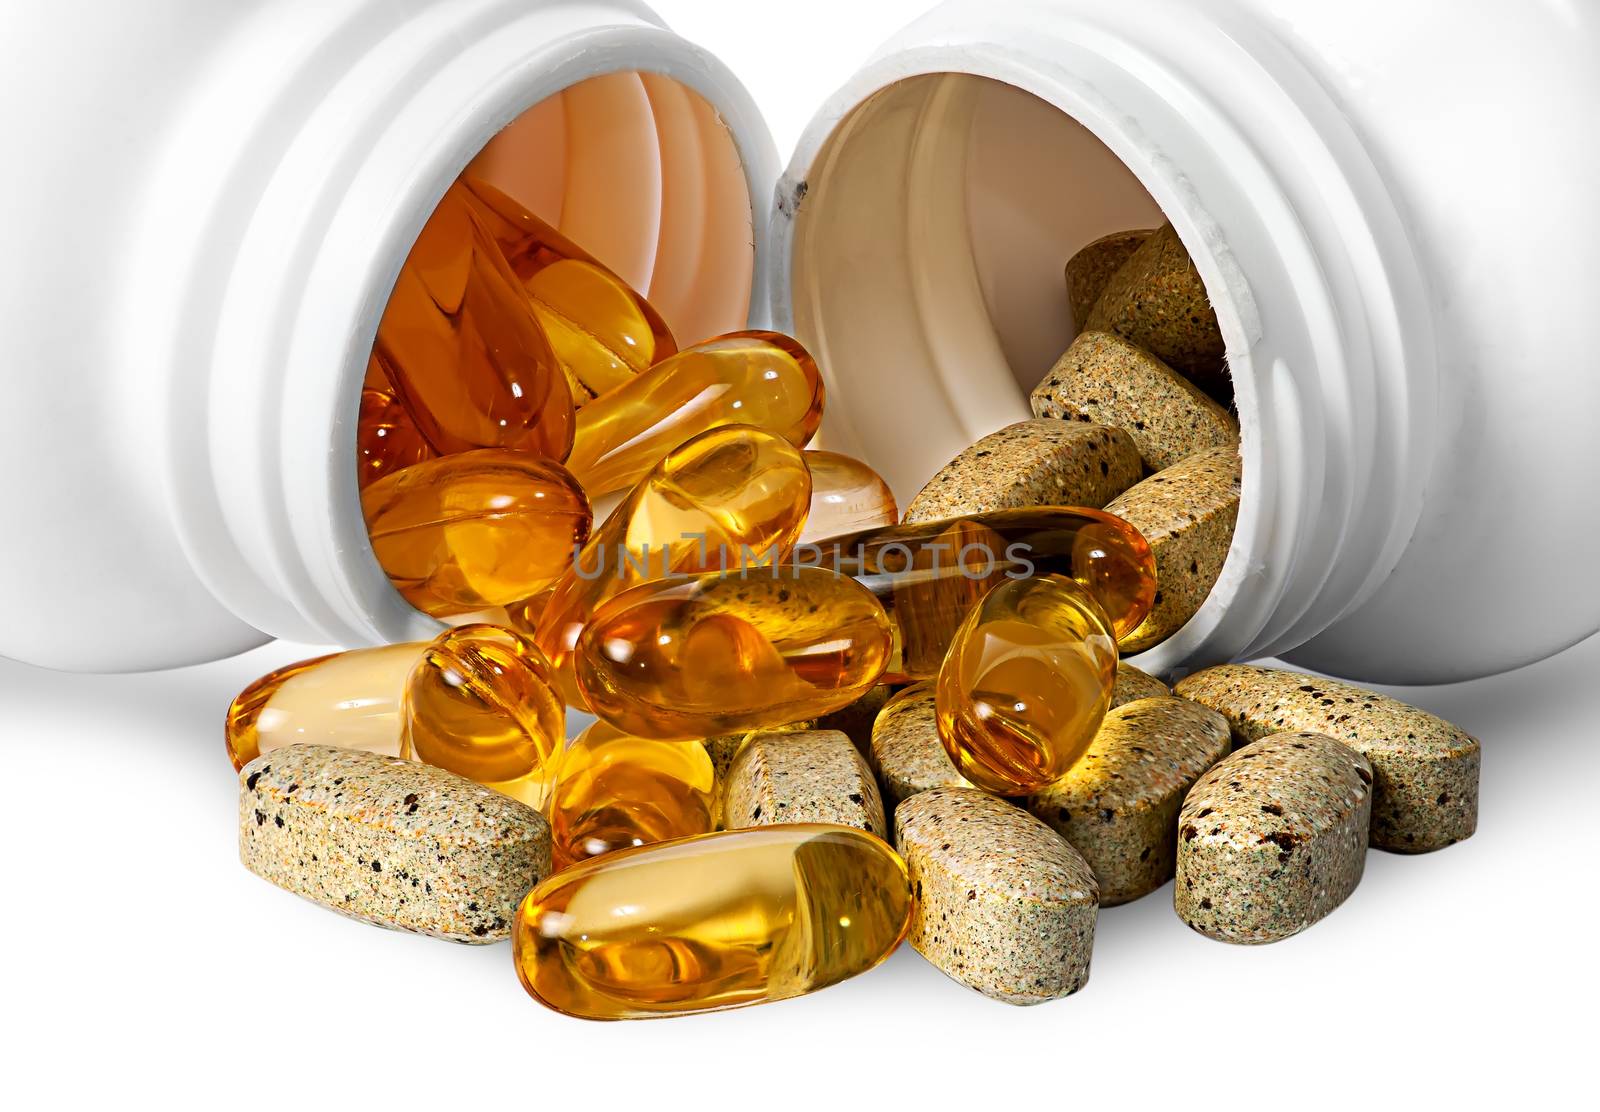 Vitamins and fish oil capsules together by Cipariss